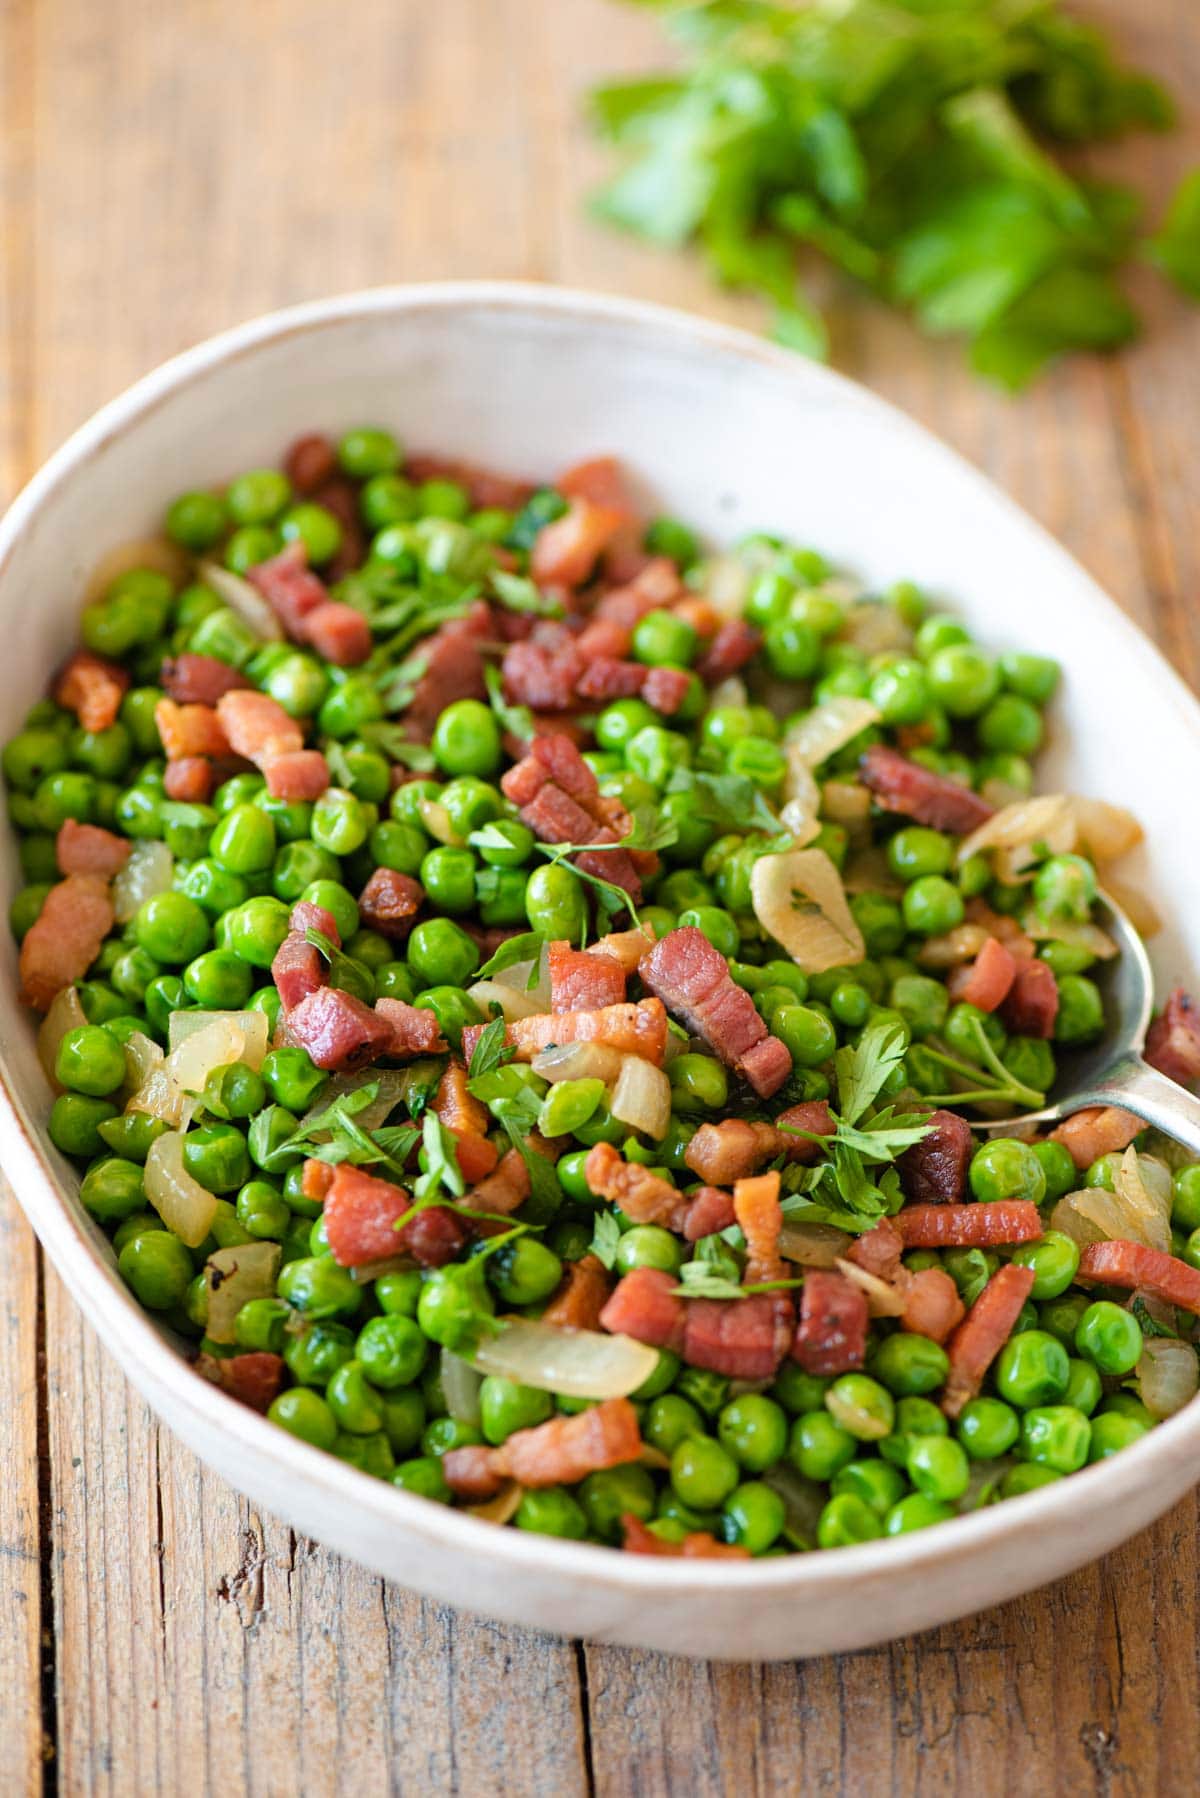 Peas and pancetta in a large serving bowl